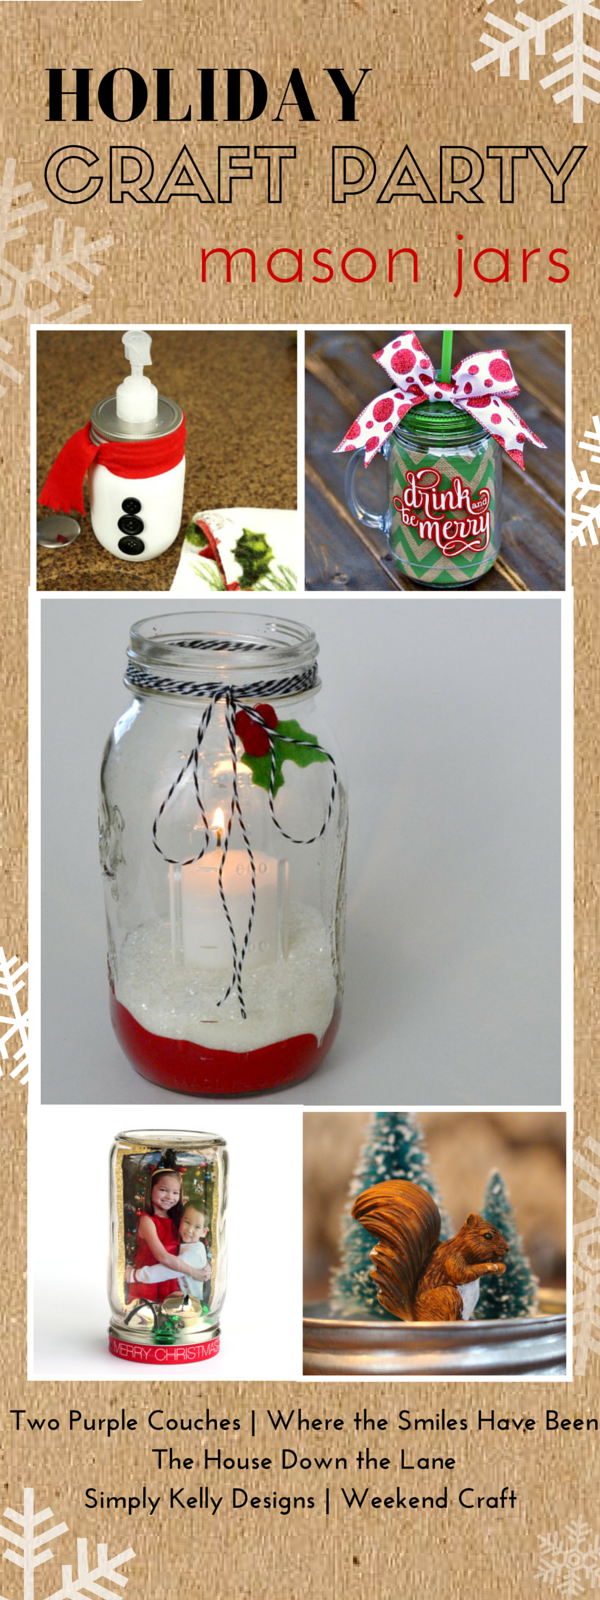 5 classic ideas for using Mason jars in your holiday decor. Join us for our Holiday Craft Part - a week full of holiday crafts, creative ideas and inspiration!